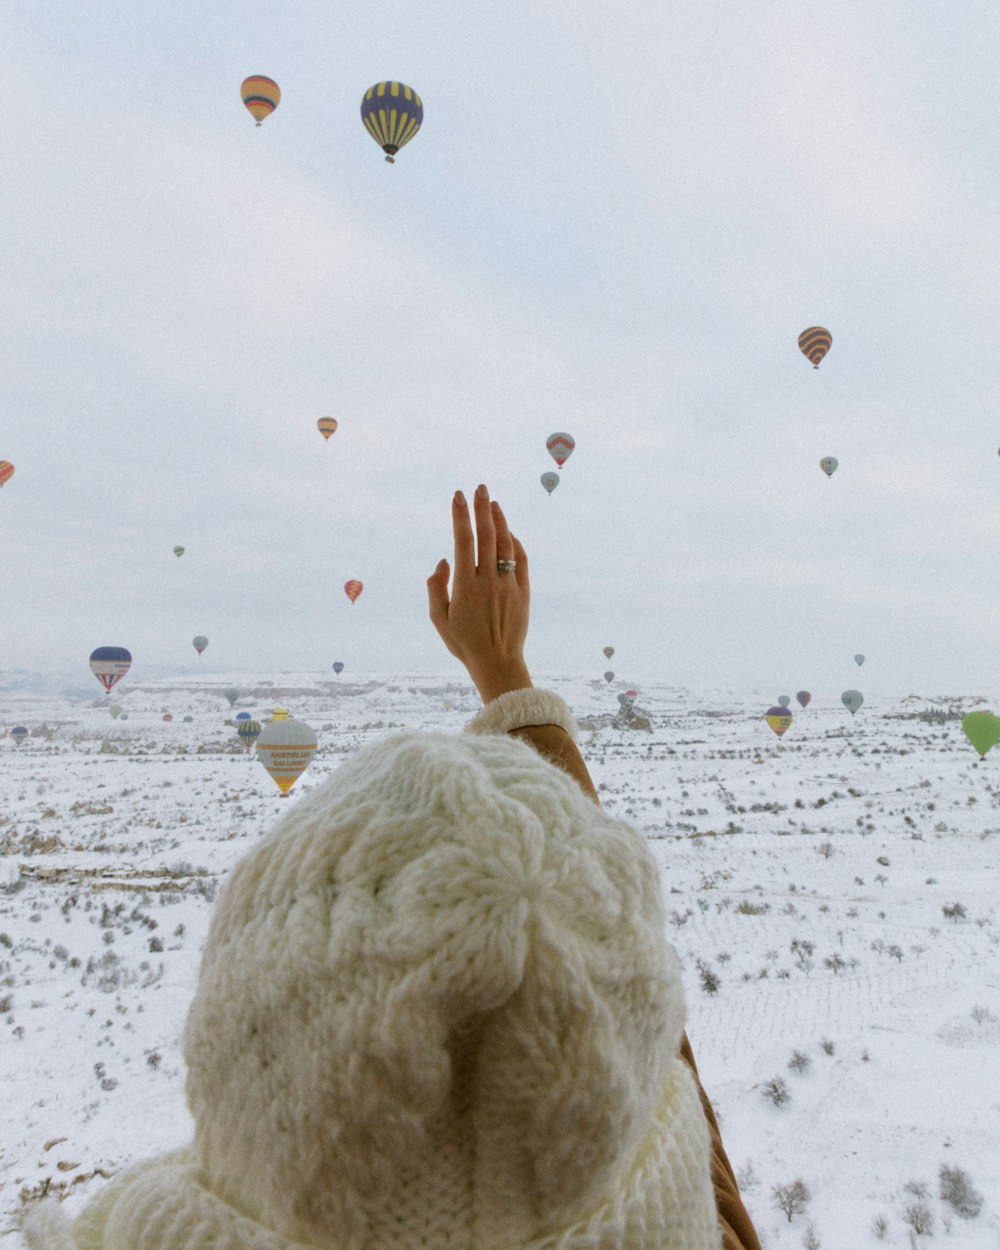 a person is looking at hot air balloons in the sky